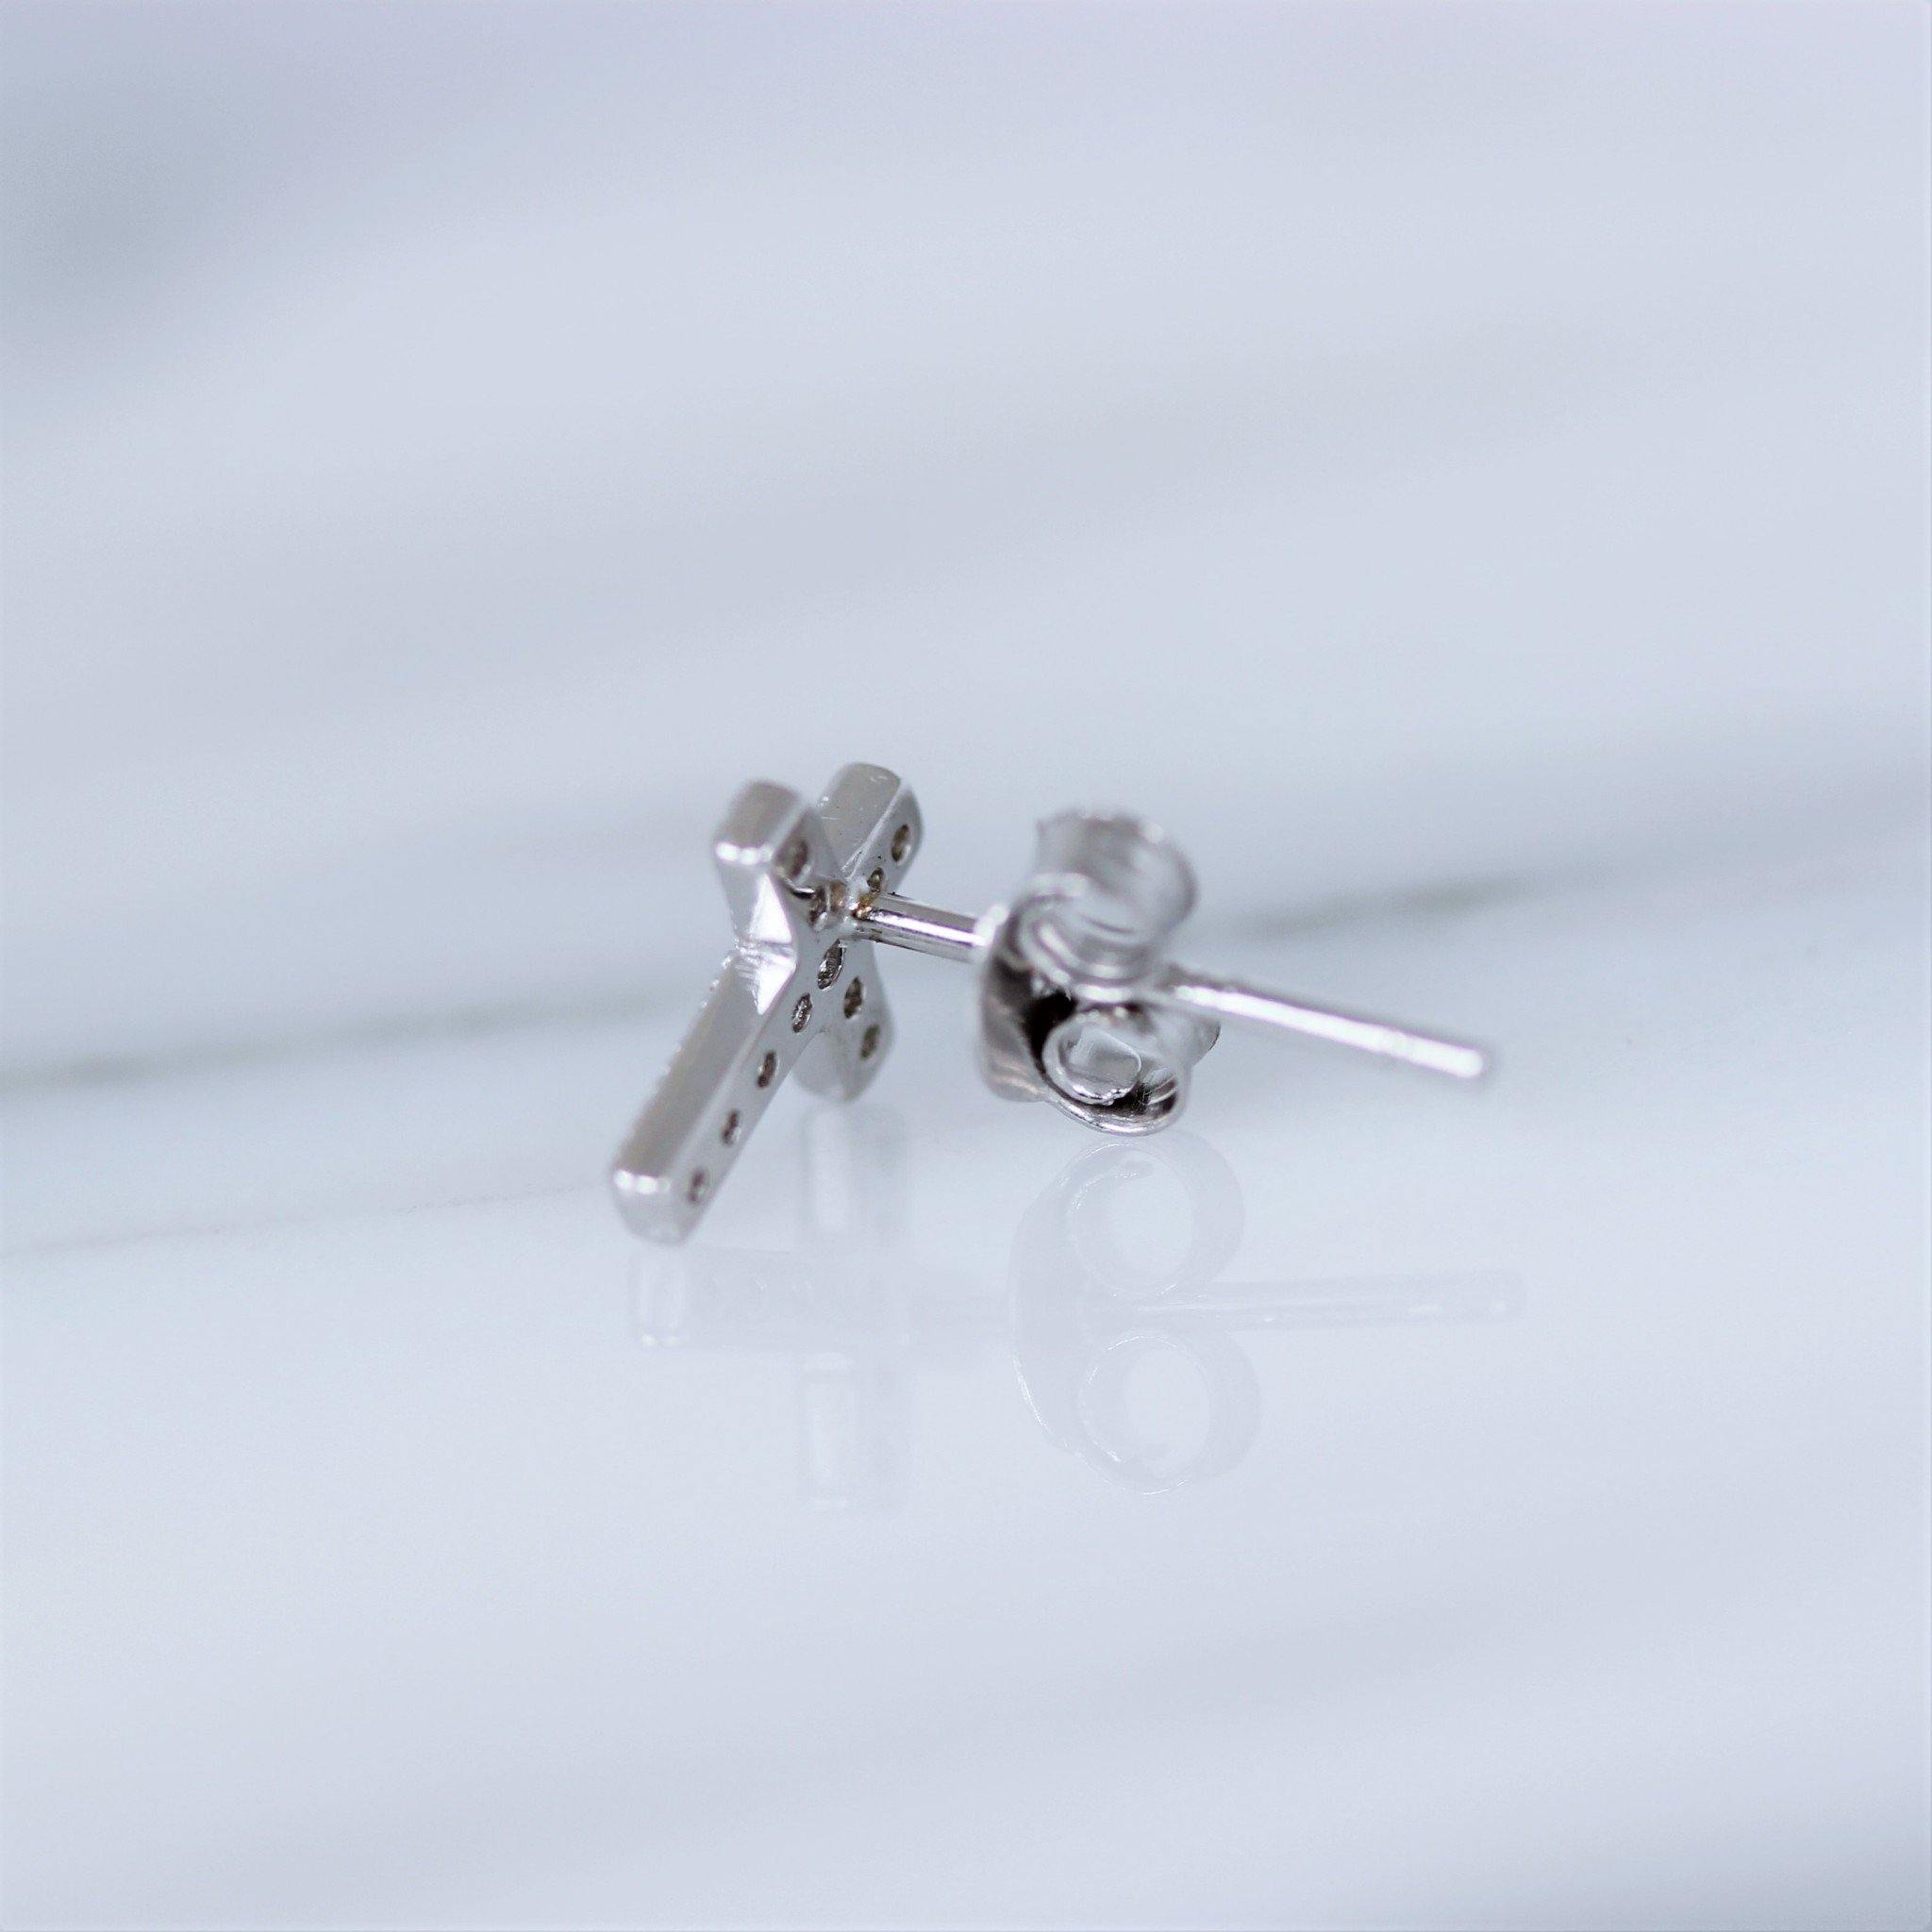 Sterling Silver Vintage Inspired CZ Religious Cross Stud Earrings - STERLING SILVER DESIGNS